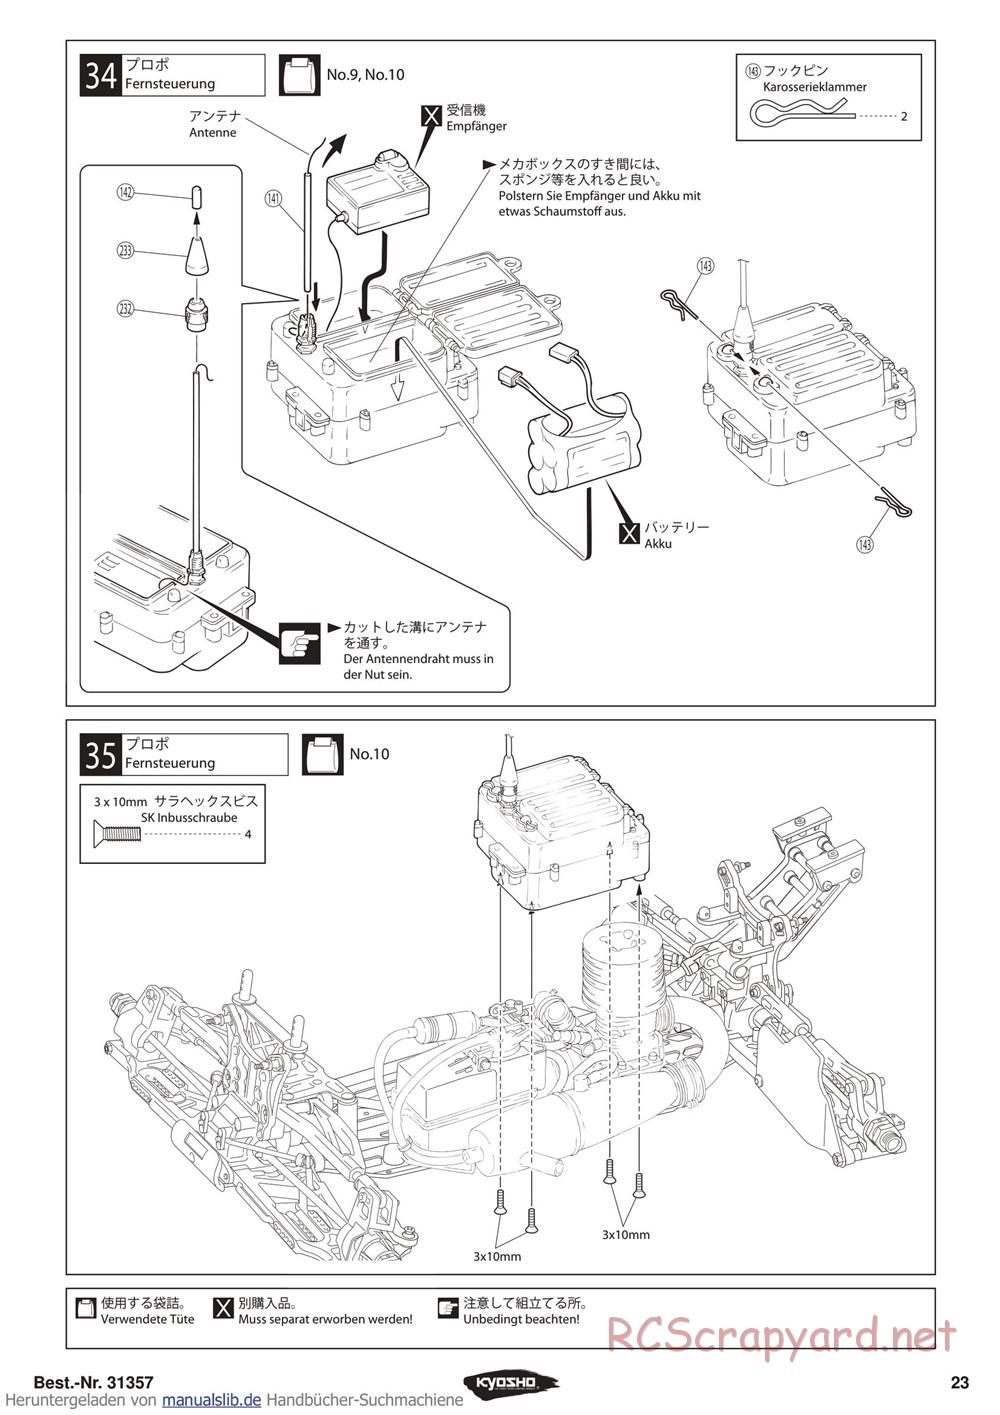 Kyosho - Inferno ST-RR Evo - Manual - Page 23